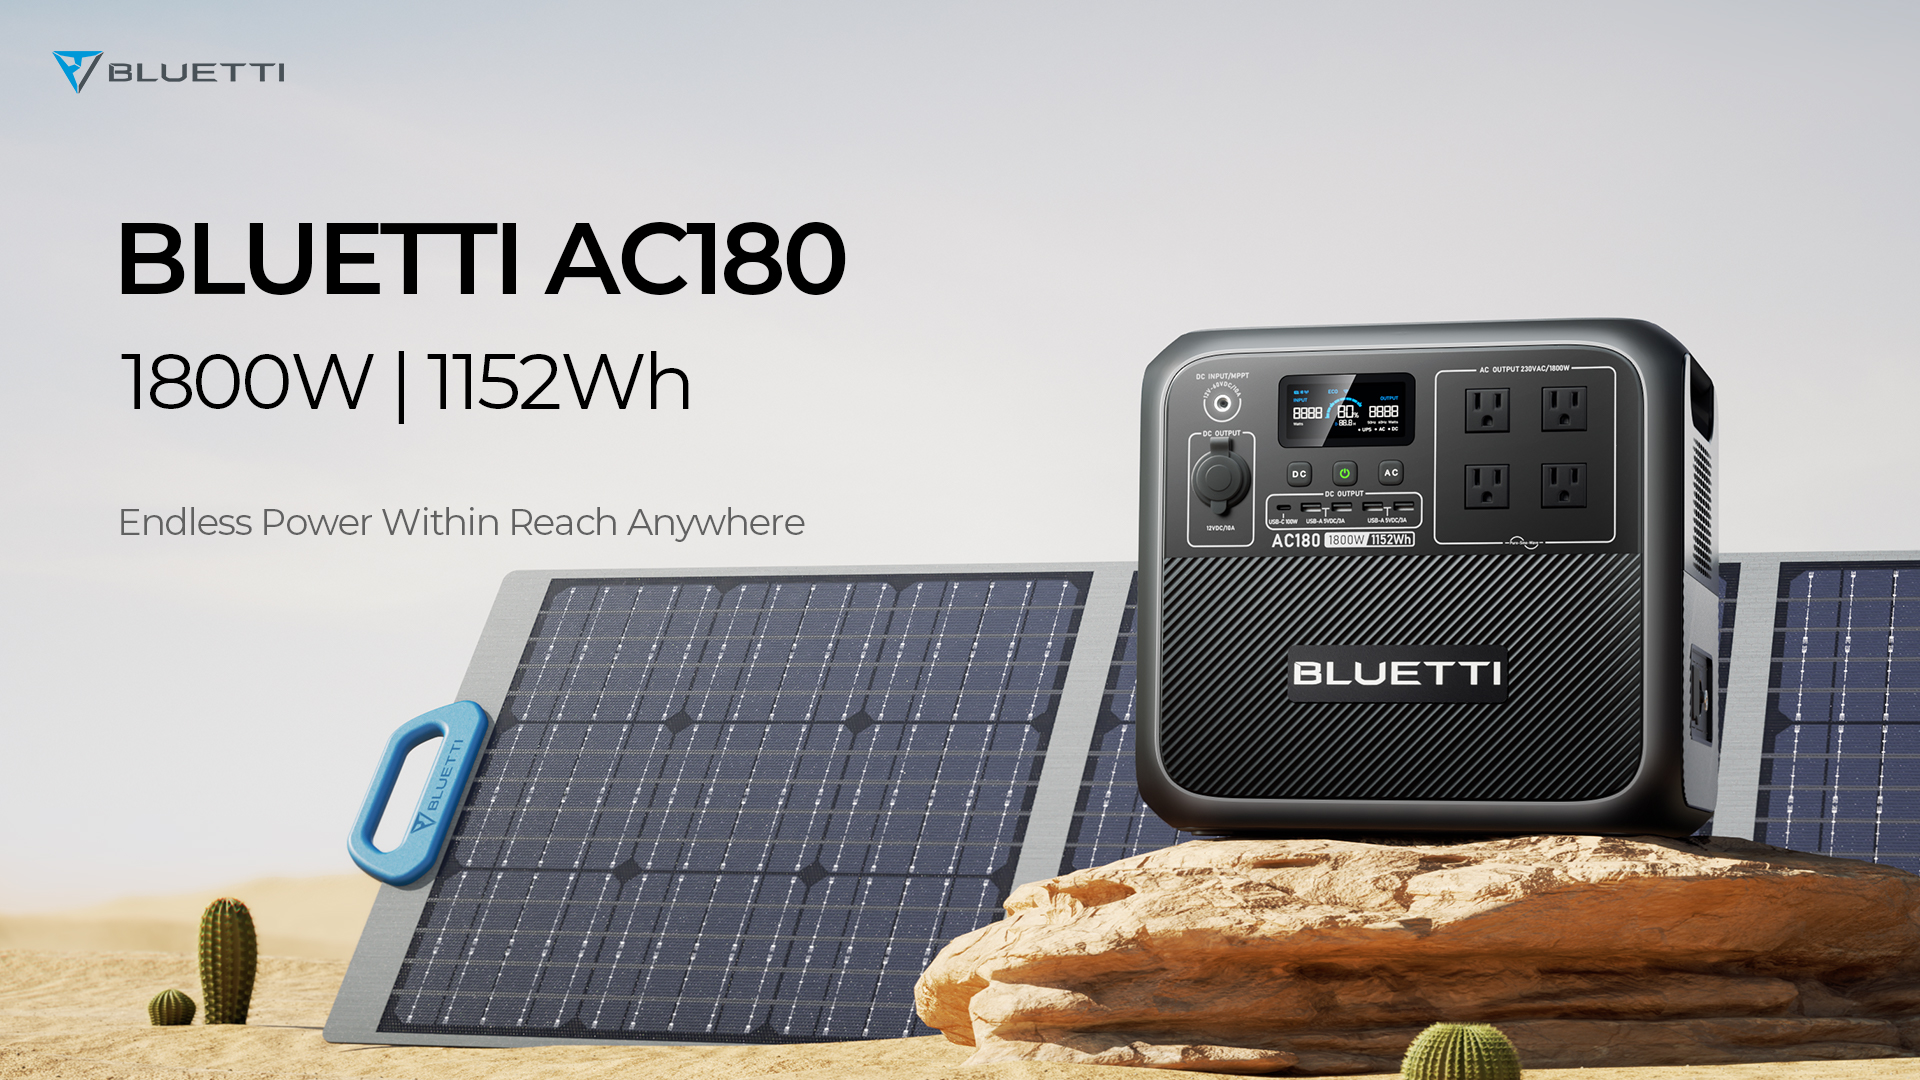 BLUETTI AC180 Mobile Power Station Is Launching to Meet the World